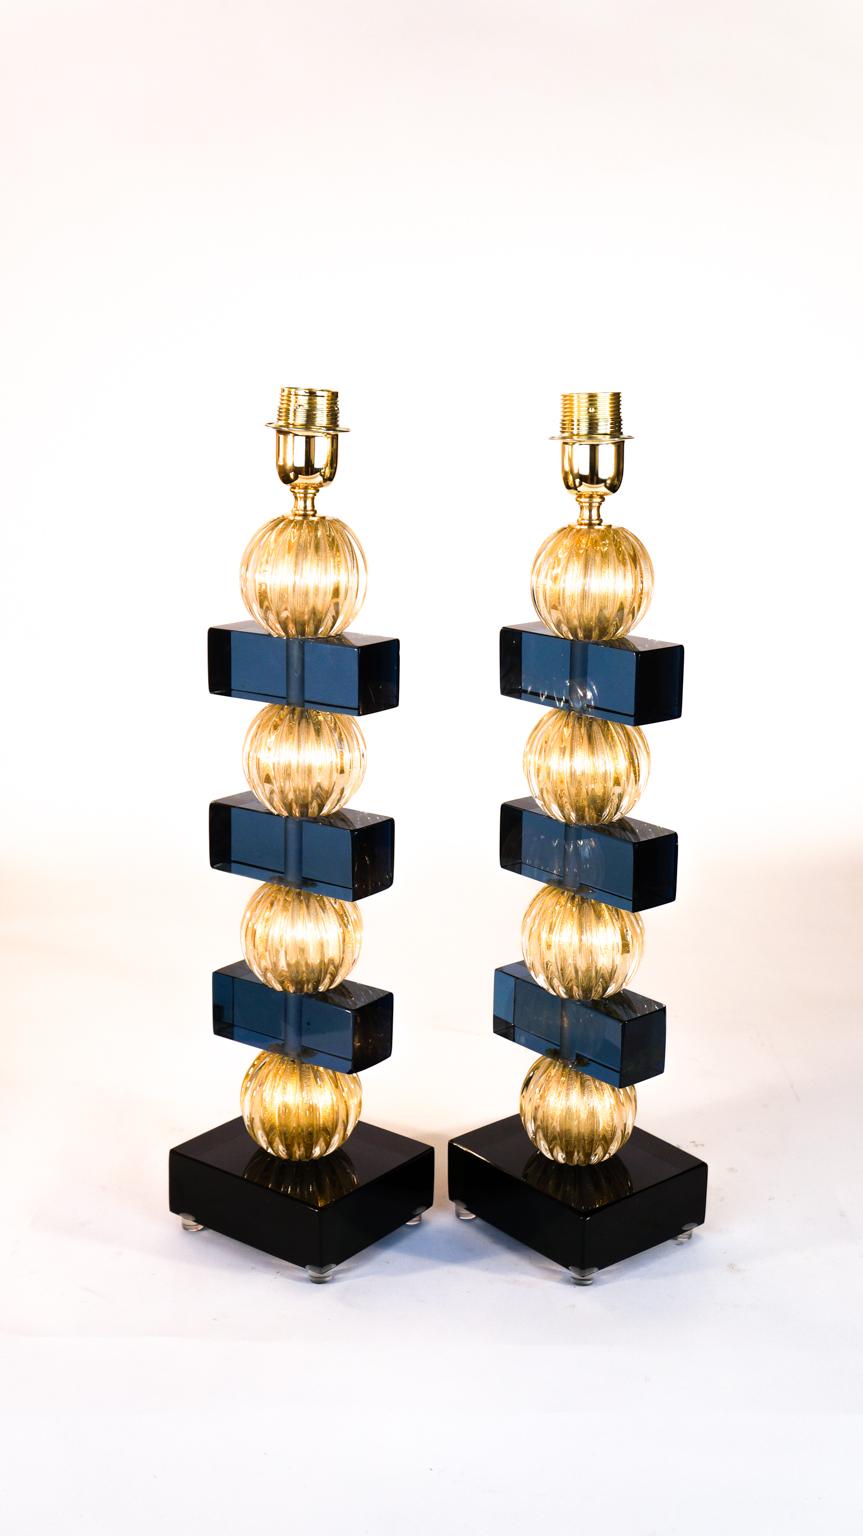 Alberto Donà Murano Pair of Blue Gold Venetian Glass Table Lamps, 1980s For Sale 8